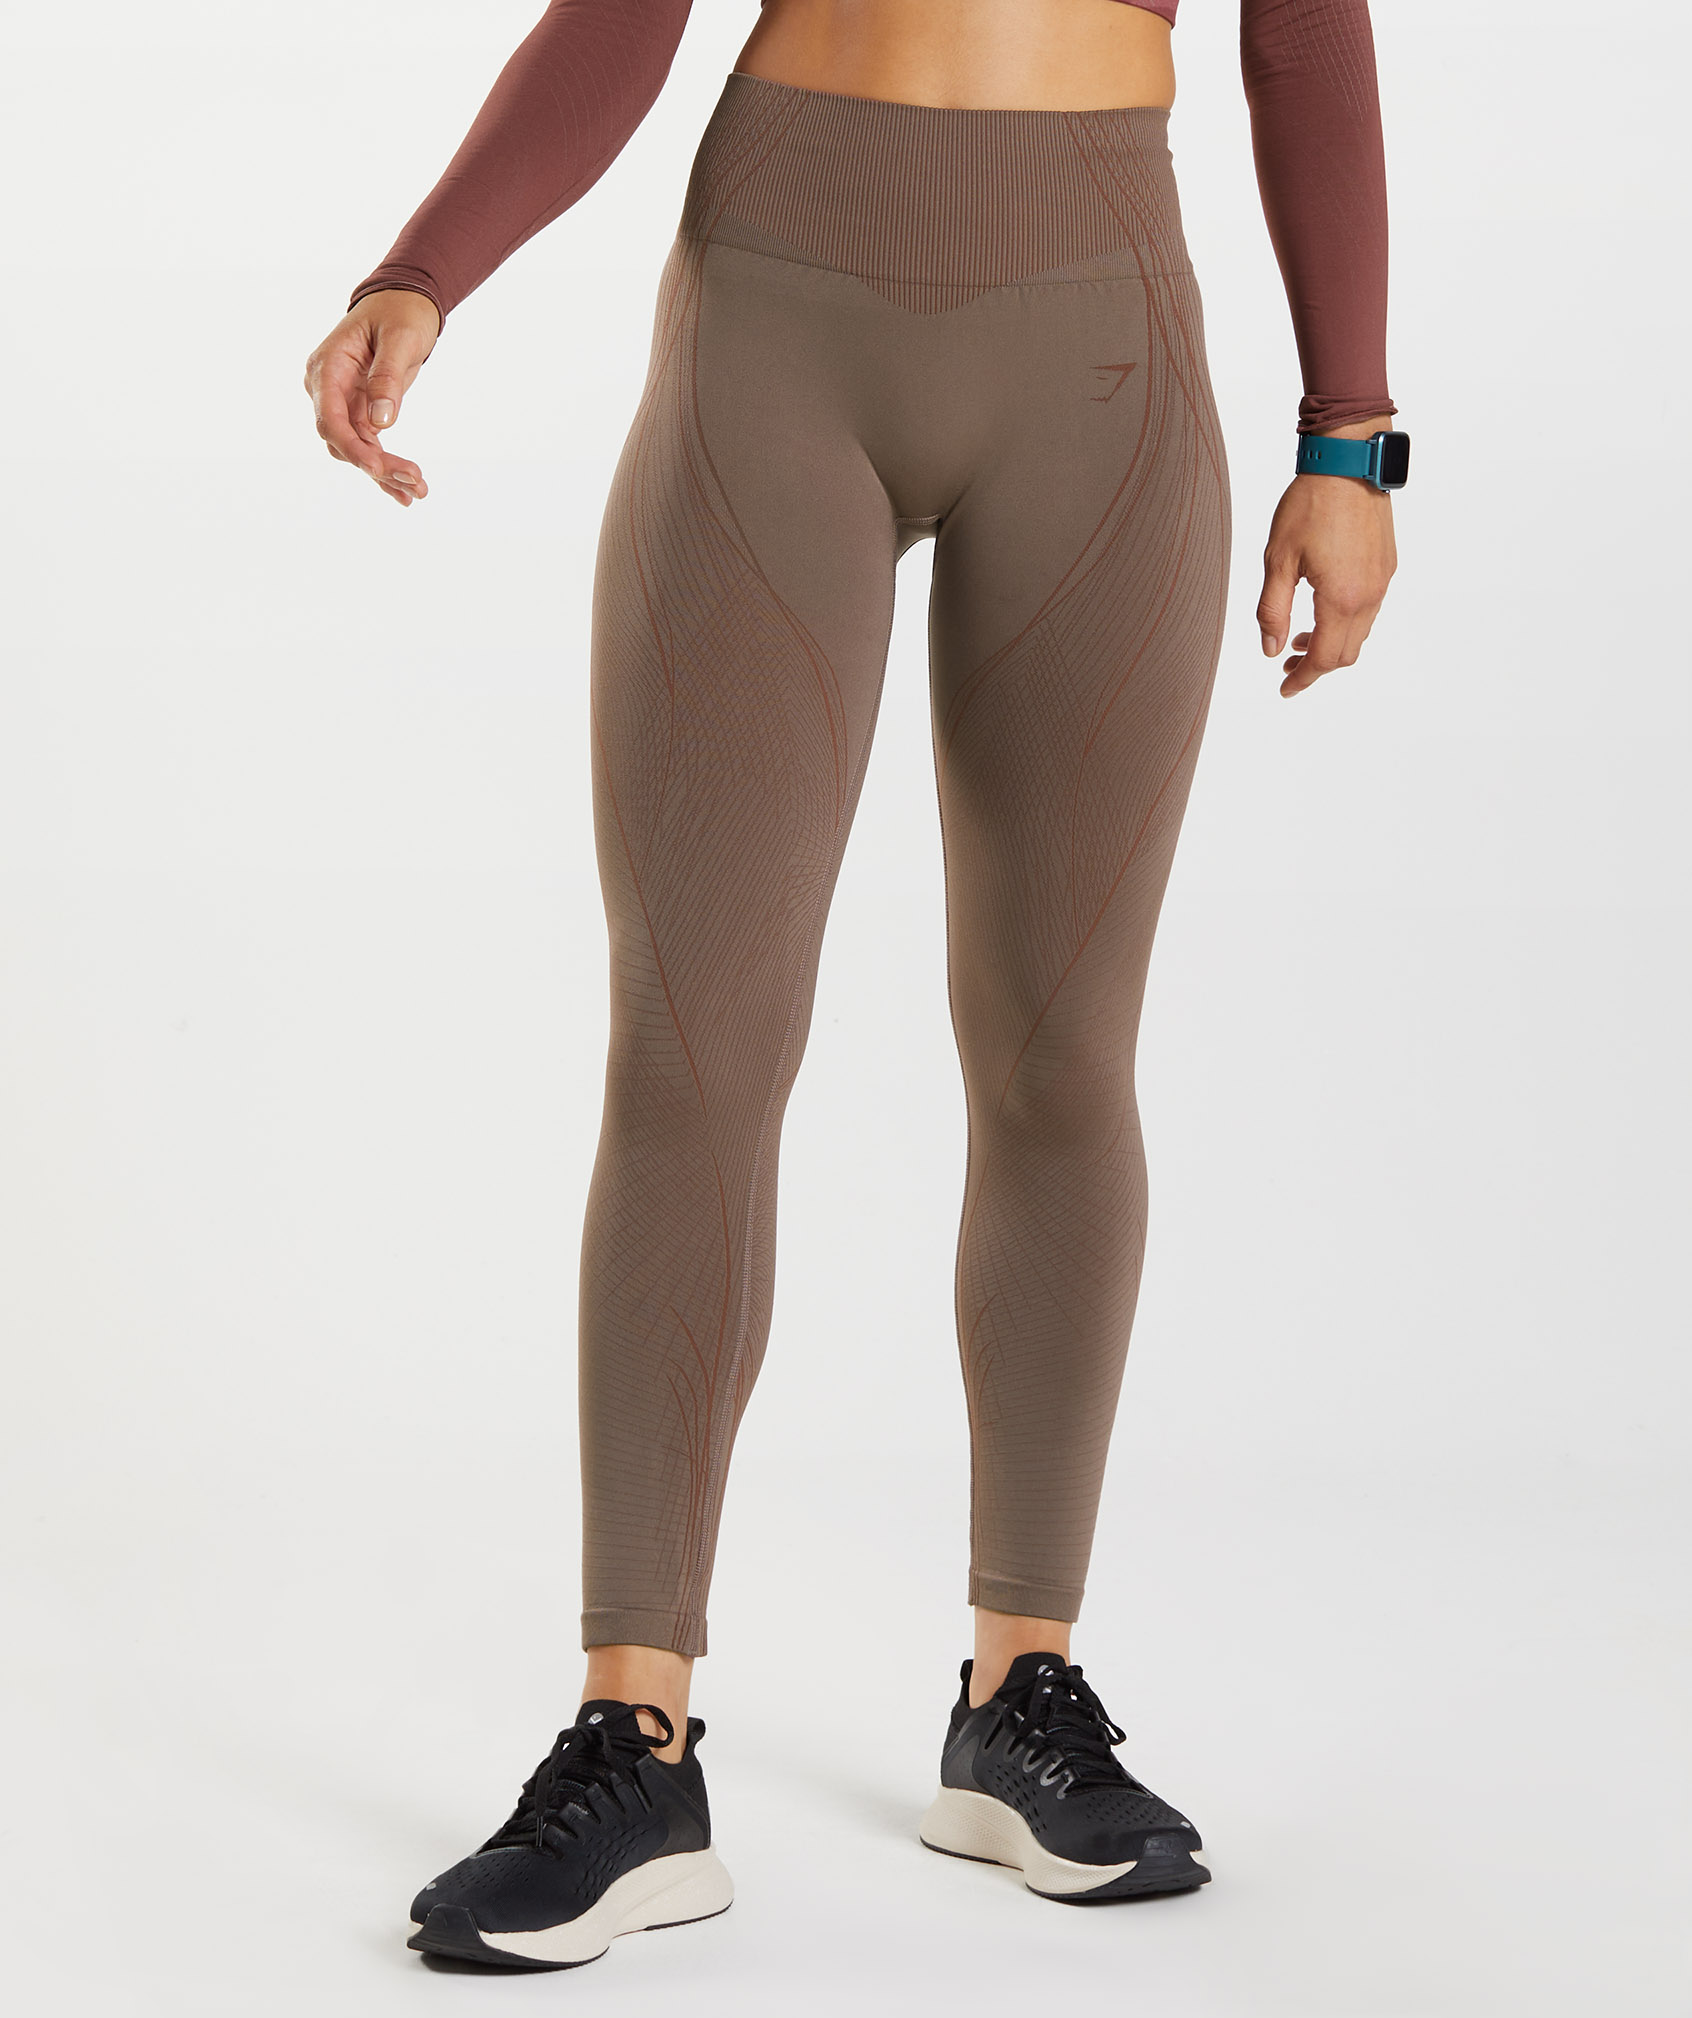 The Best High-Waisted Leggings For Every Workout